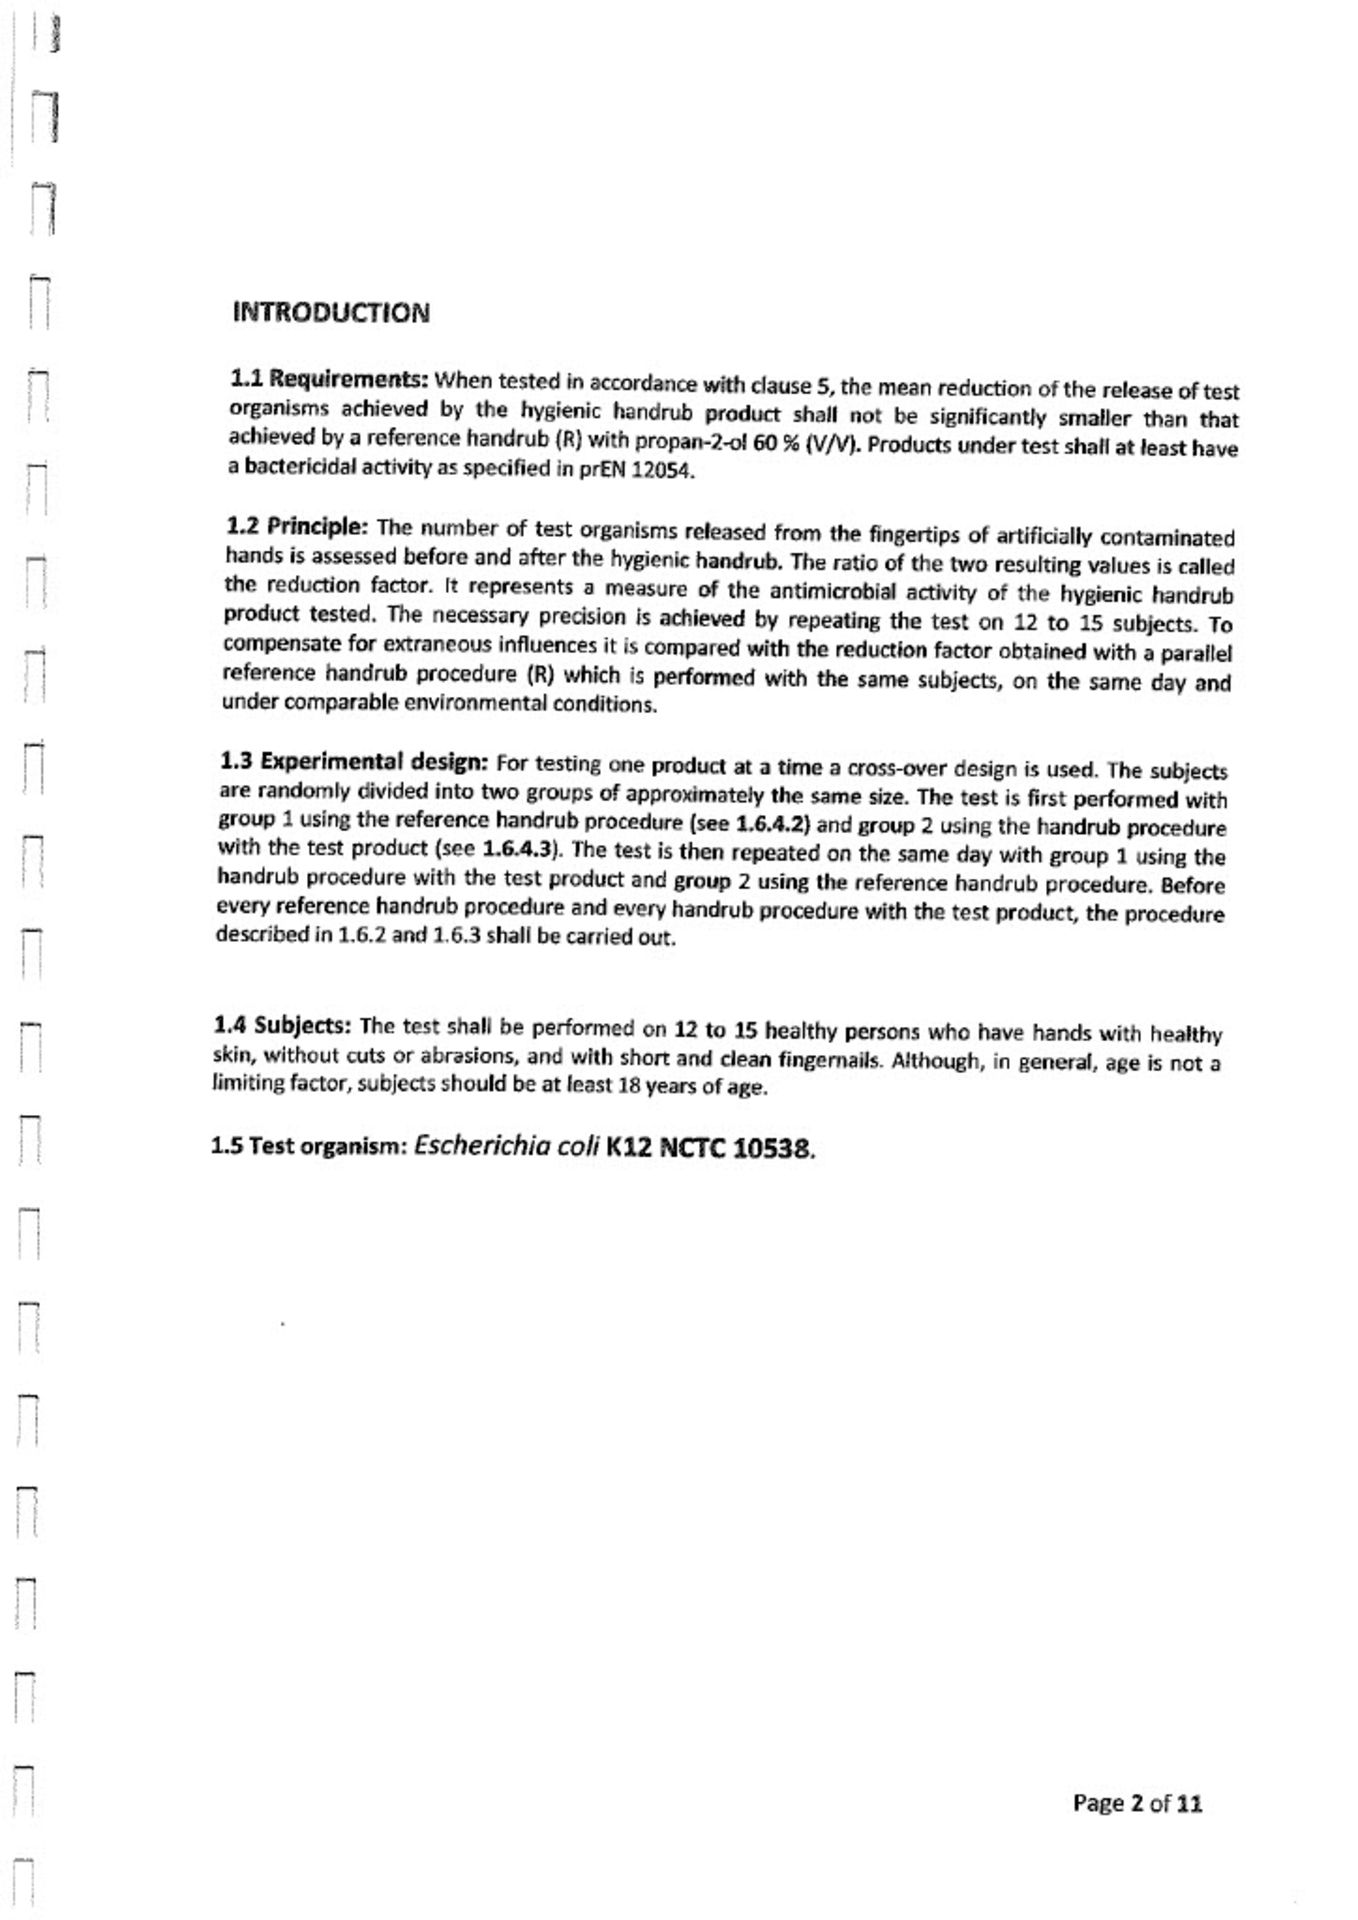 TANK OF DUOMAX SUPER CONCENTRATED DISINFECTANT, MADE IN UK, MARCH 2020, ALL DOCUMENTS ATTACHED - Image 42 of 75